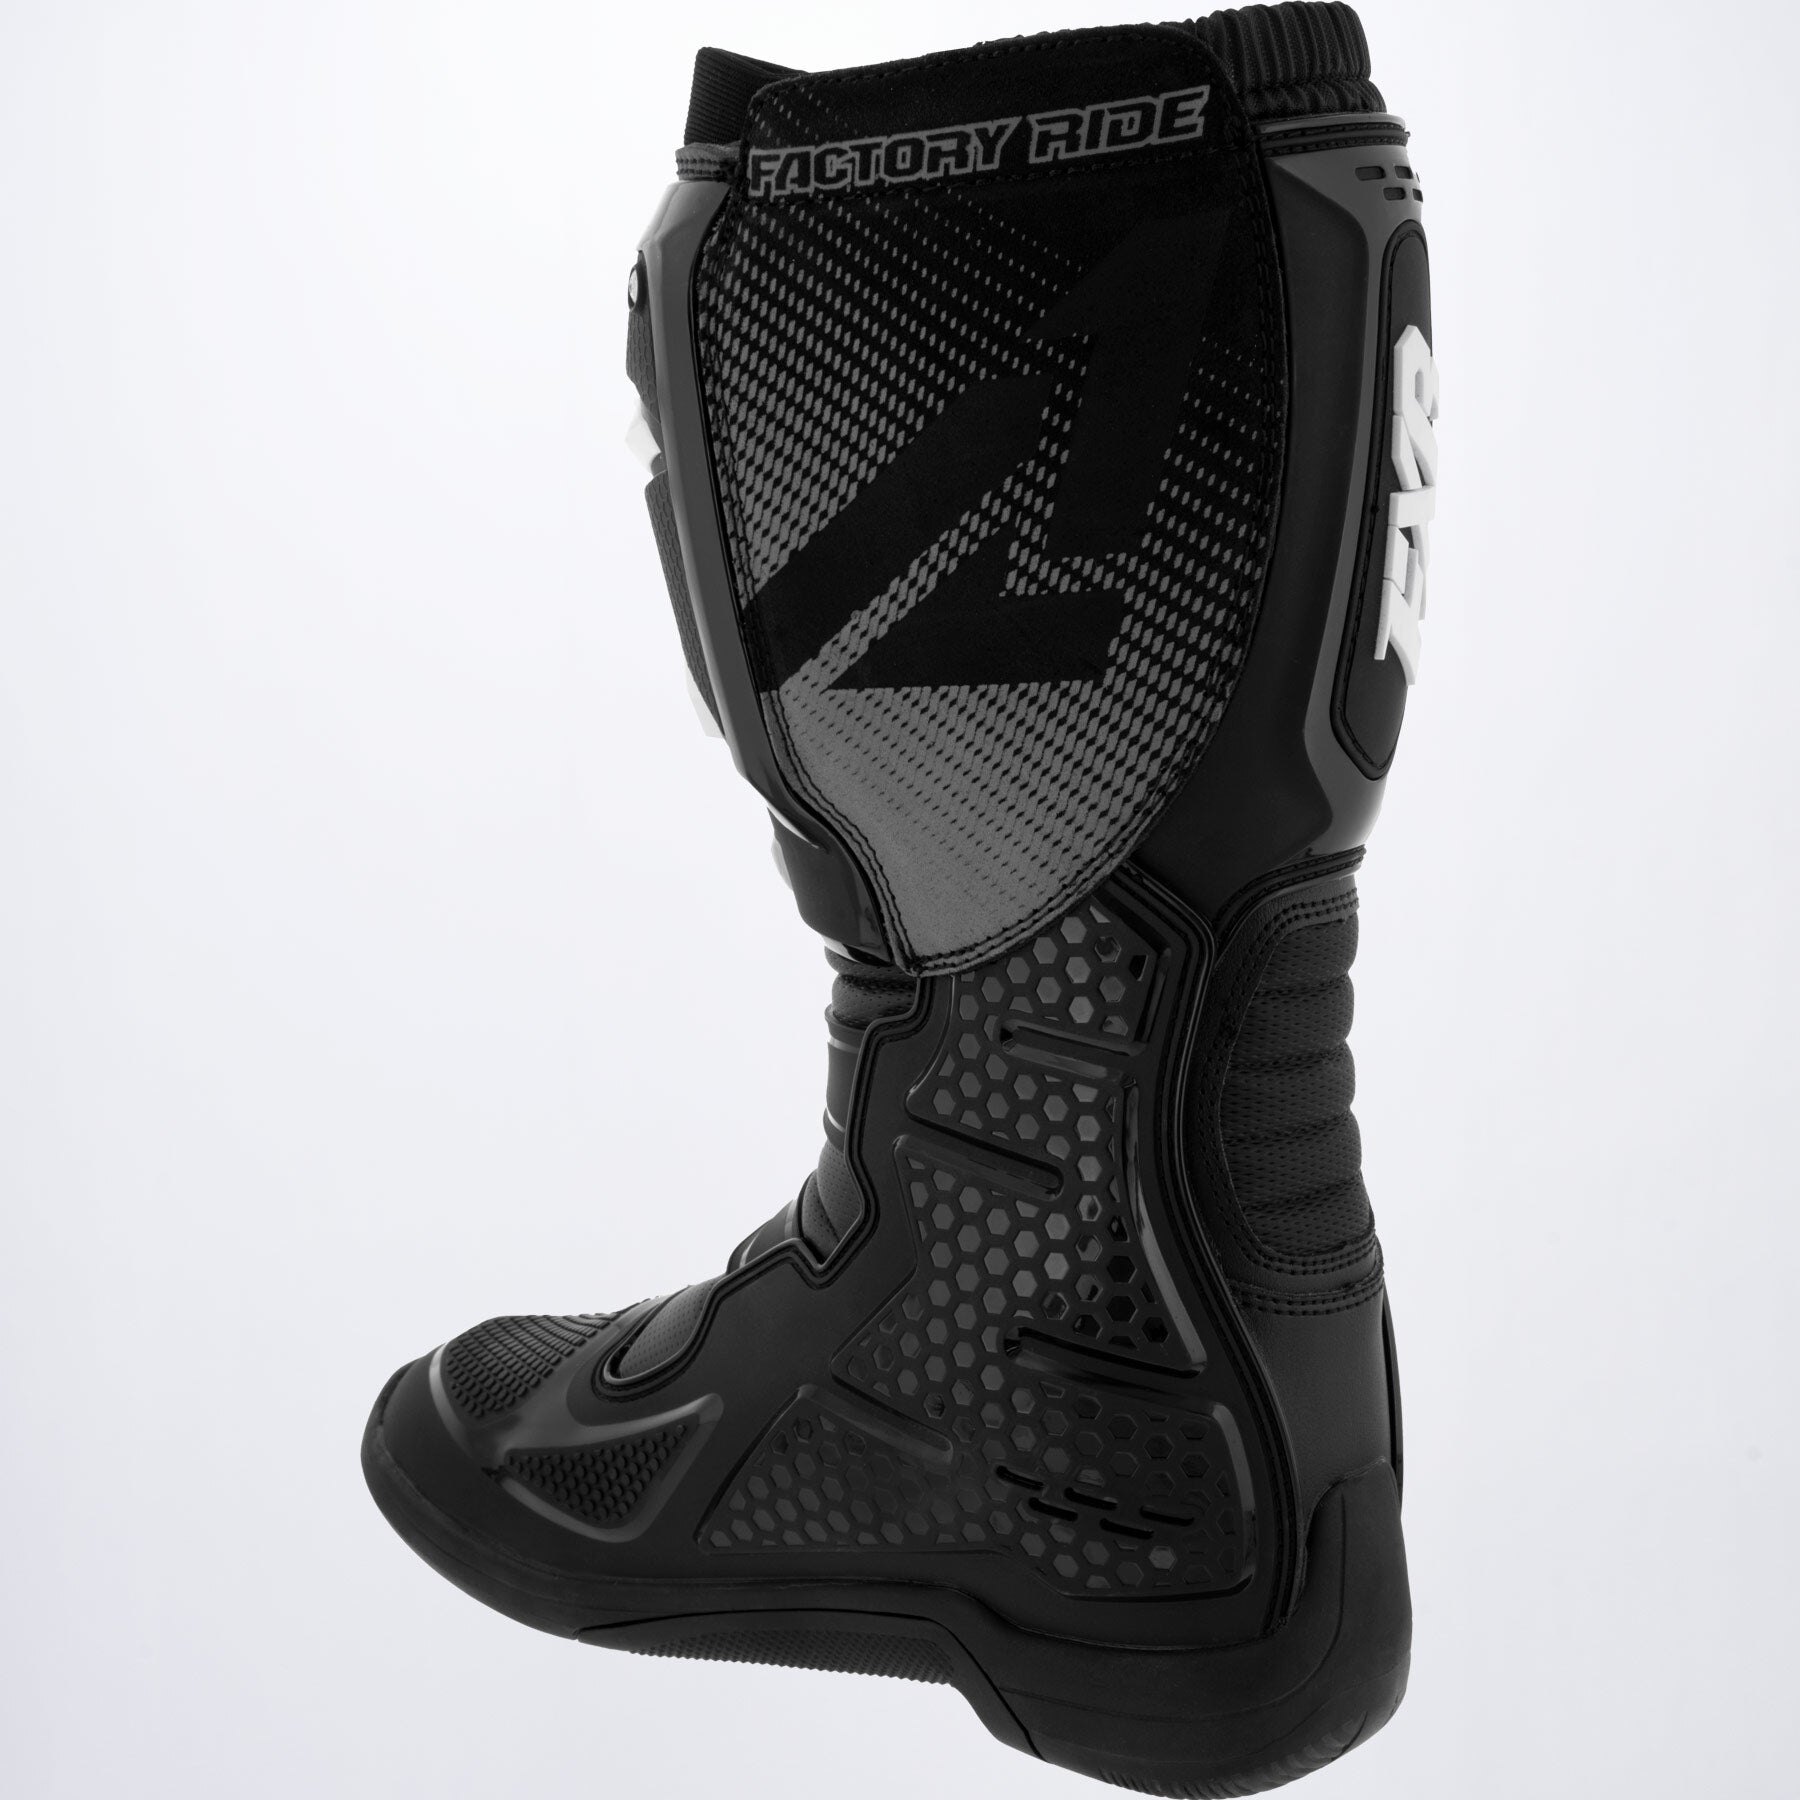 Factory Ride Boot 7/9 Black